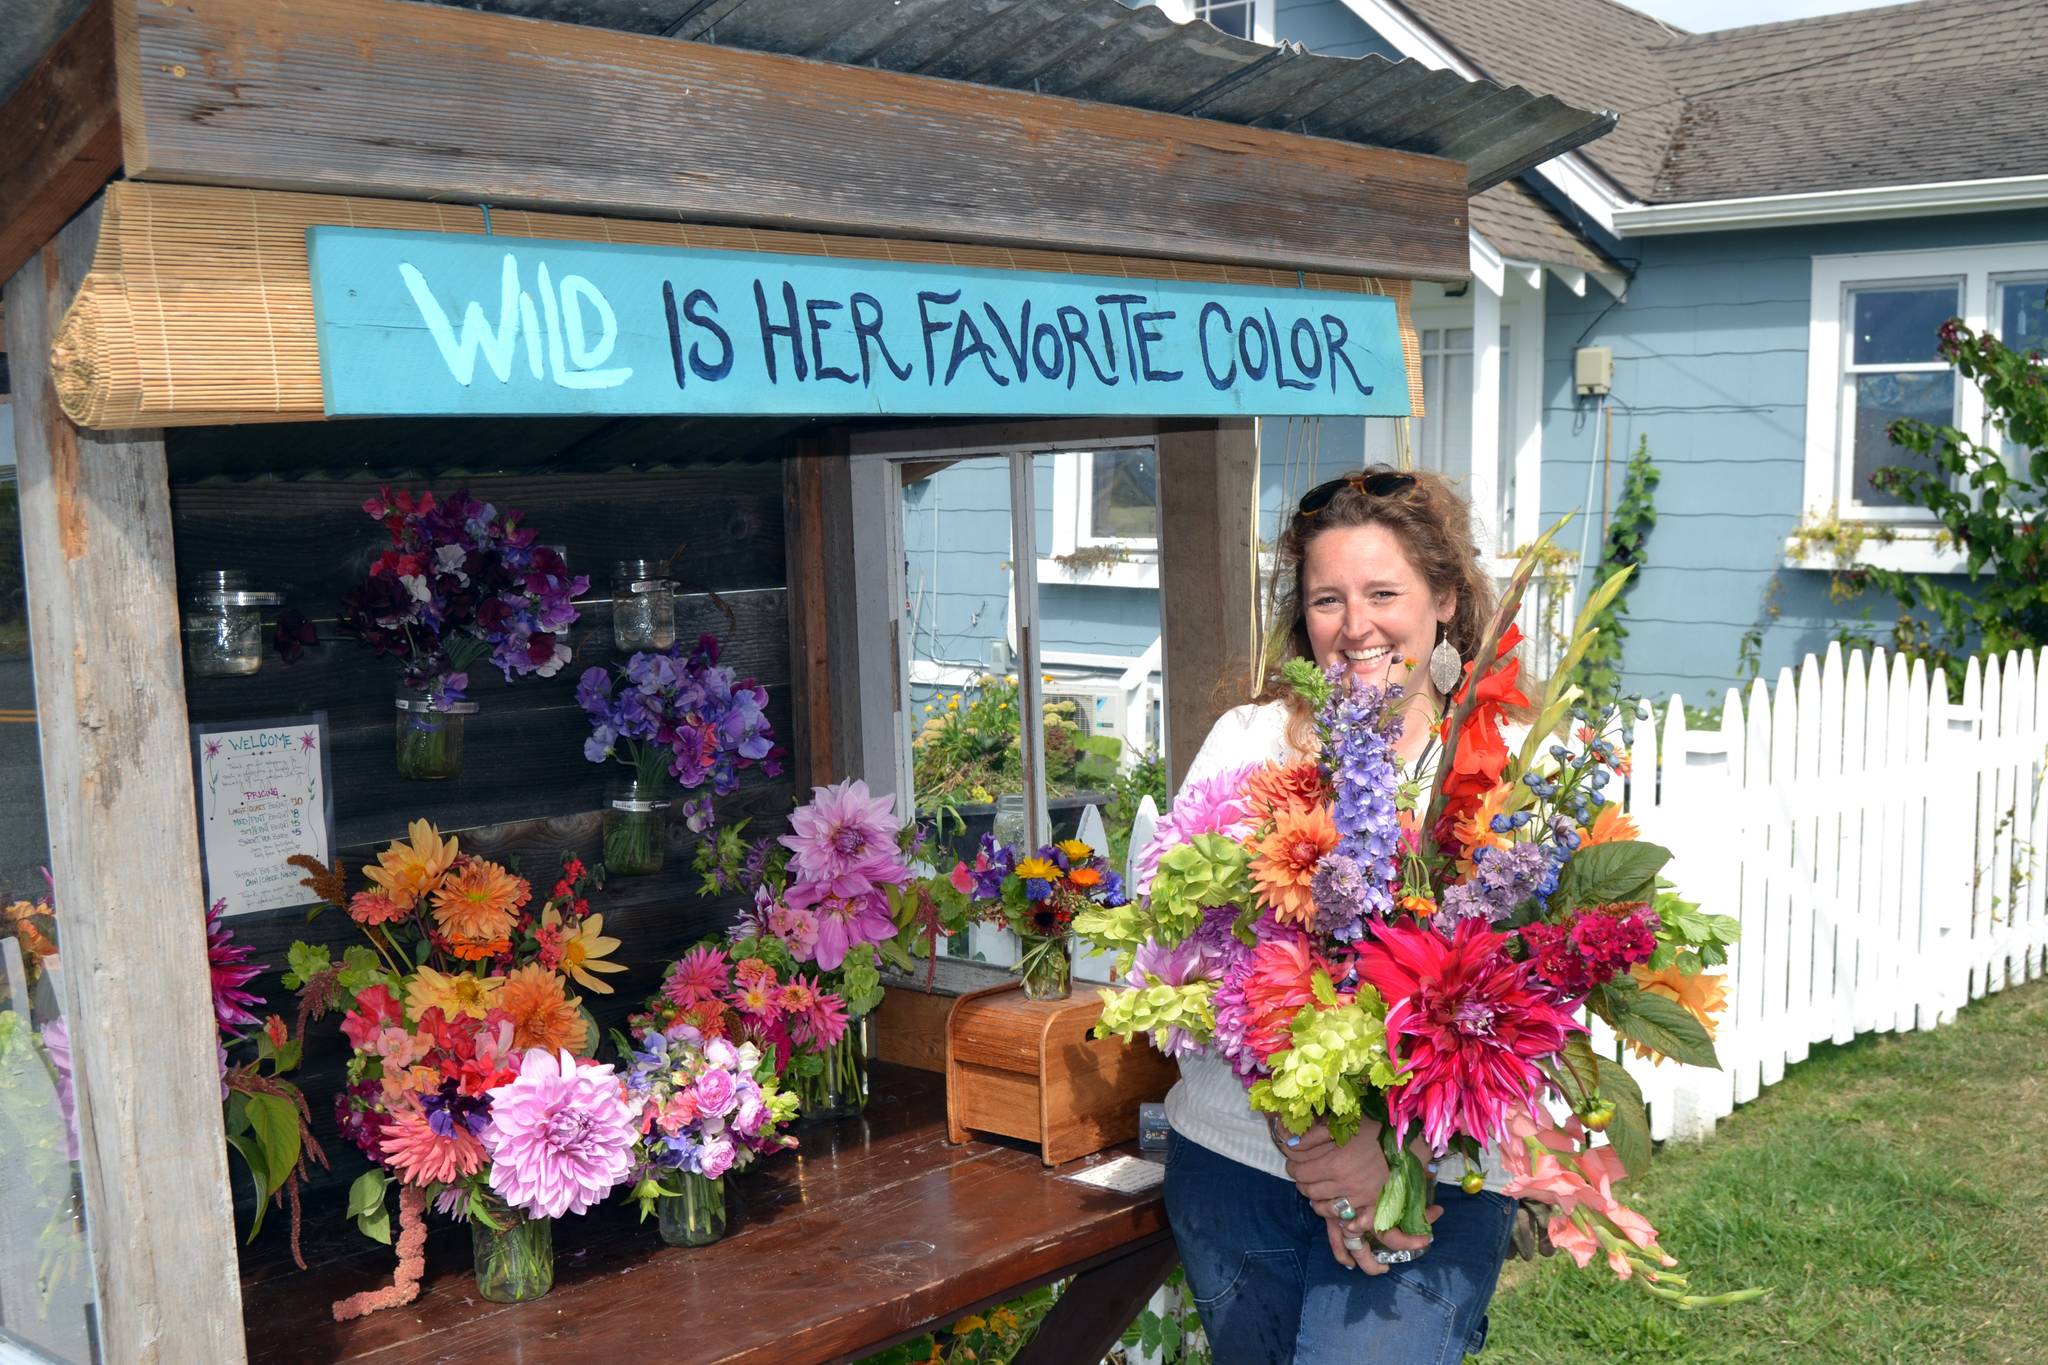 Mikel Townsley’s flower stand “Wild is Her Favorite Color” has become a popular attraction on Cays Road since going up on July 5. She planted more than 700 starts this year as a project to help channel her energies after working at the Olympic Medical Cancer Center. “I want to put my hands in the dirt and create something for these people,” she said. 
Sequim Gazette photo by Matthew Nash